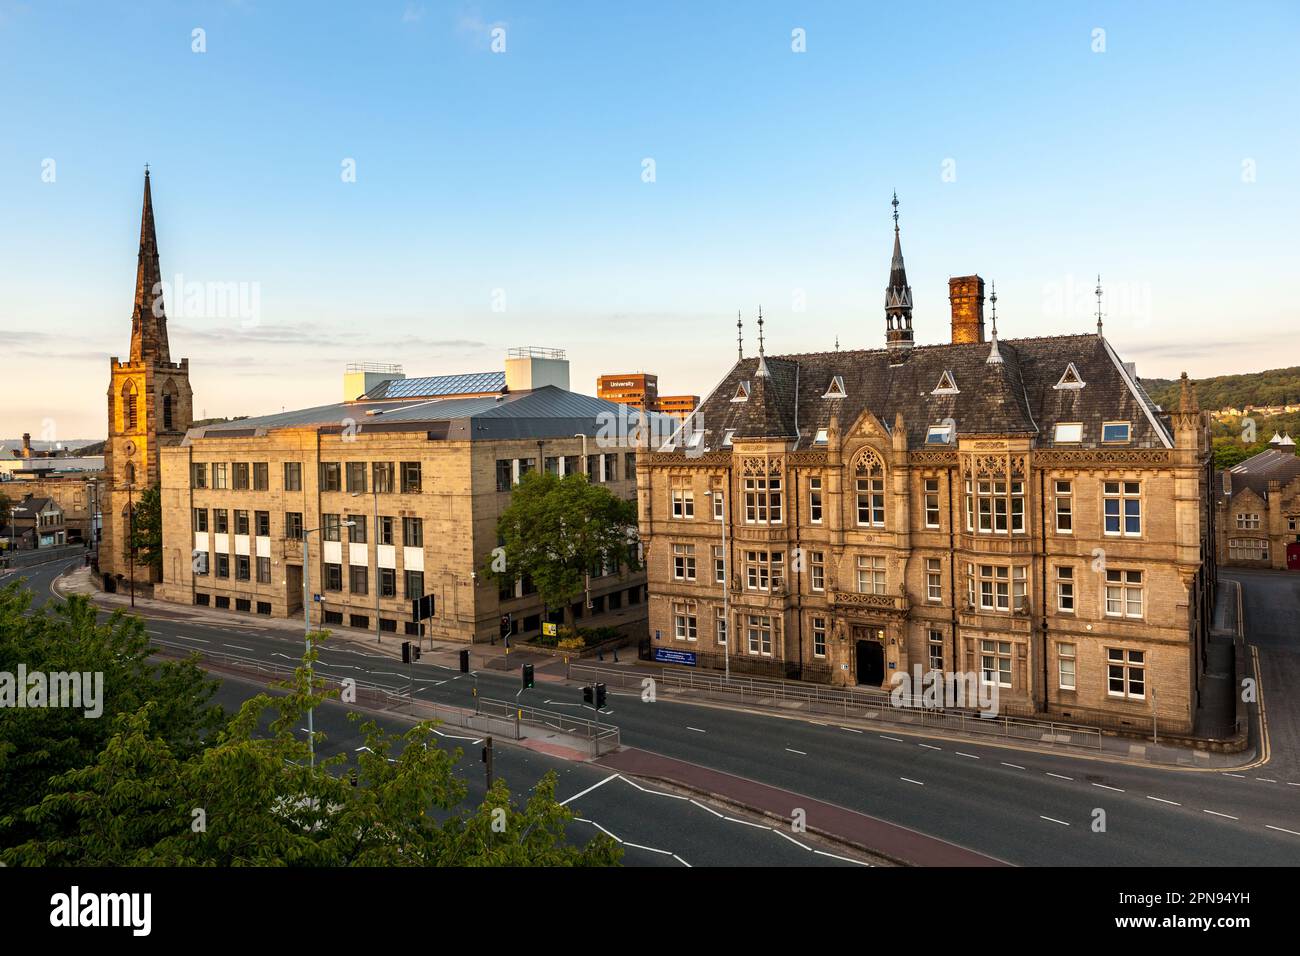 Panoramic view of The tower of St Paul's church,  Huddersfield University's science building and  Huddersfield University's Ramsden , UK Stock Photo